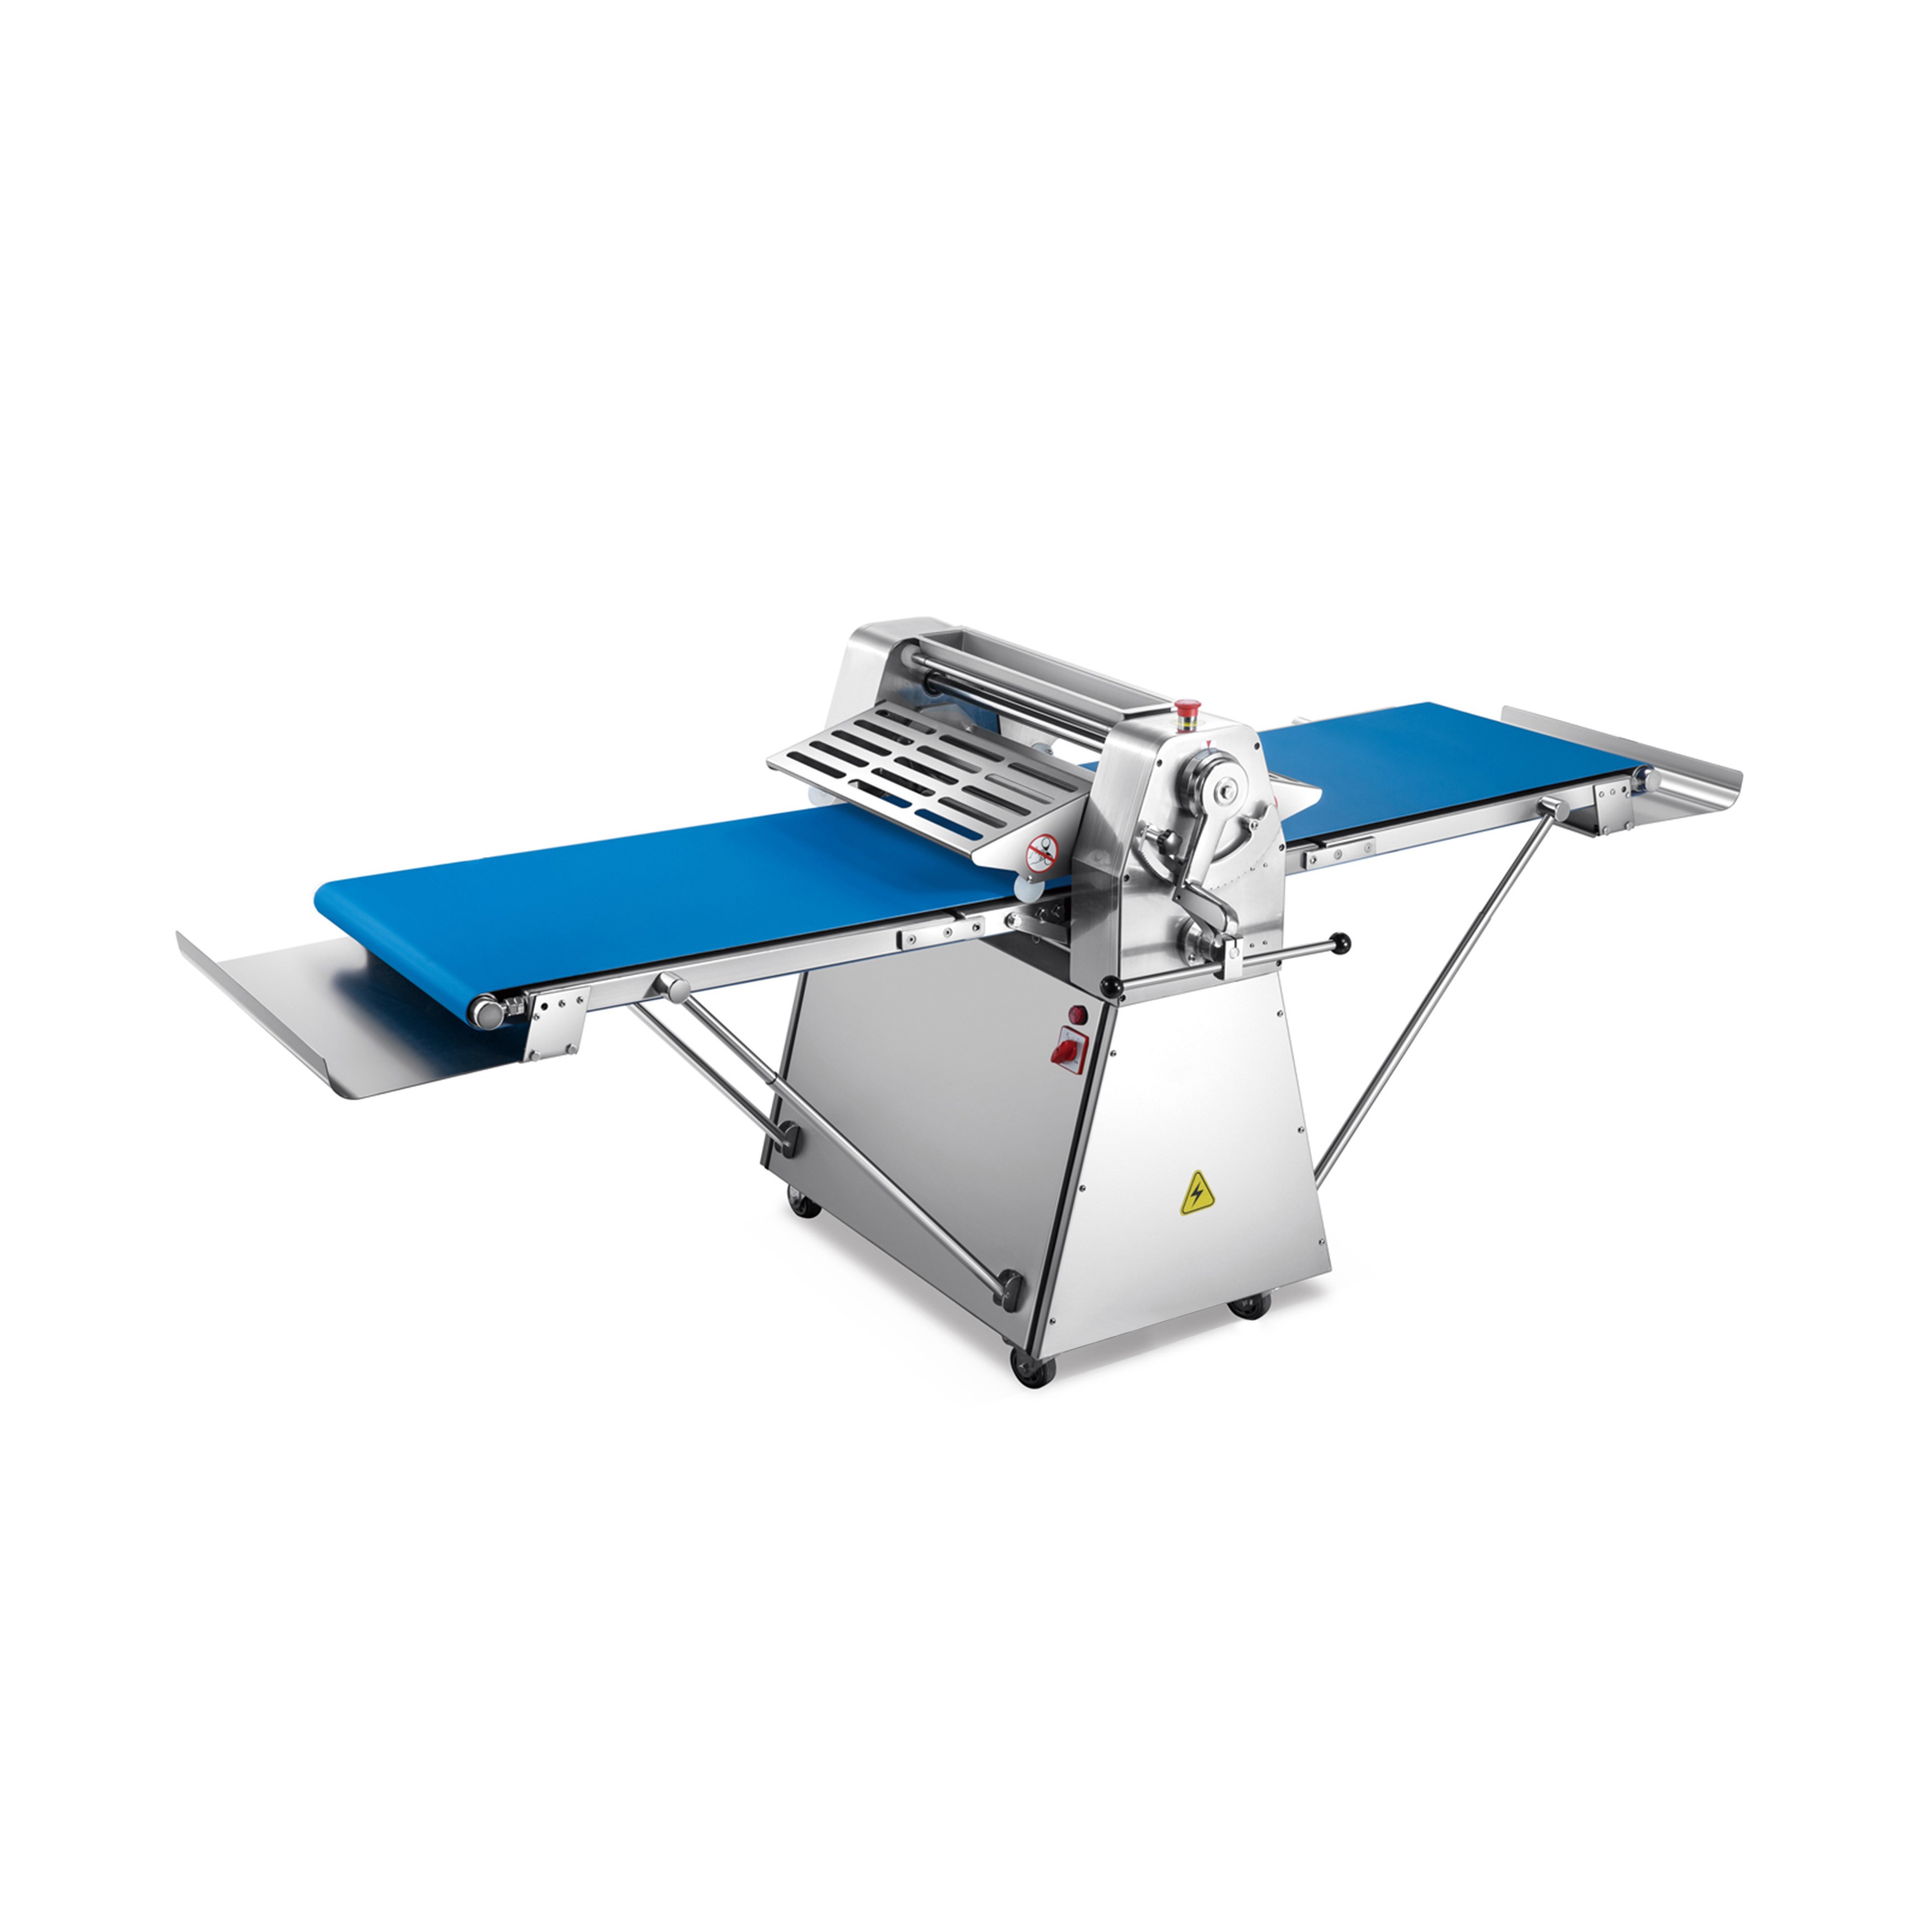 630x2400MM 750W Floor Reversible Commercial Pastry Sheeter TT-D19BC-2  Chinese restaurant equipment manufacturer and wholesaler